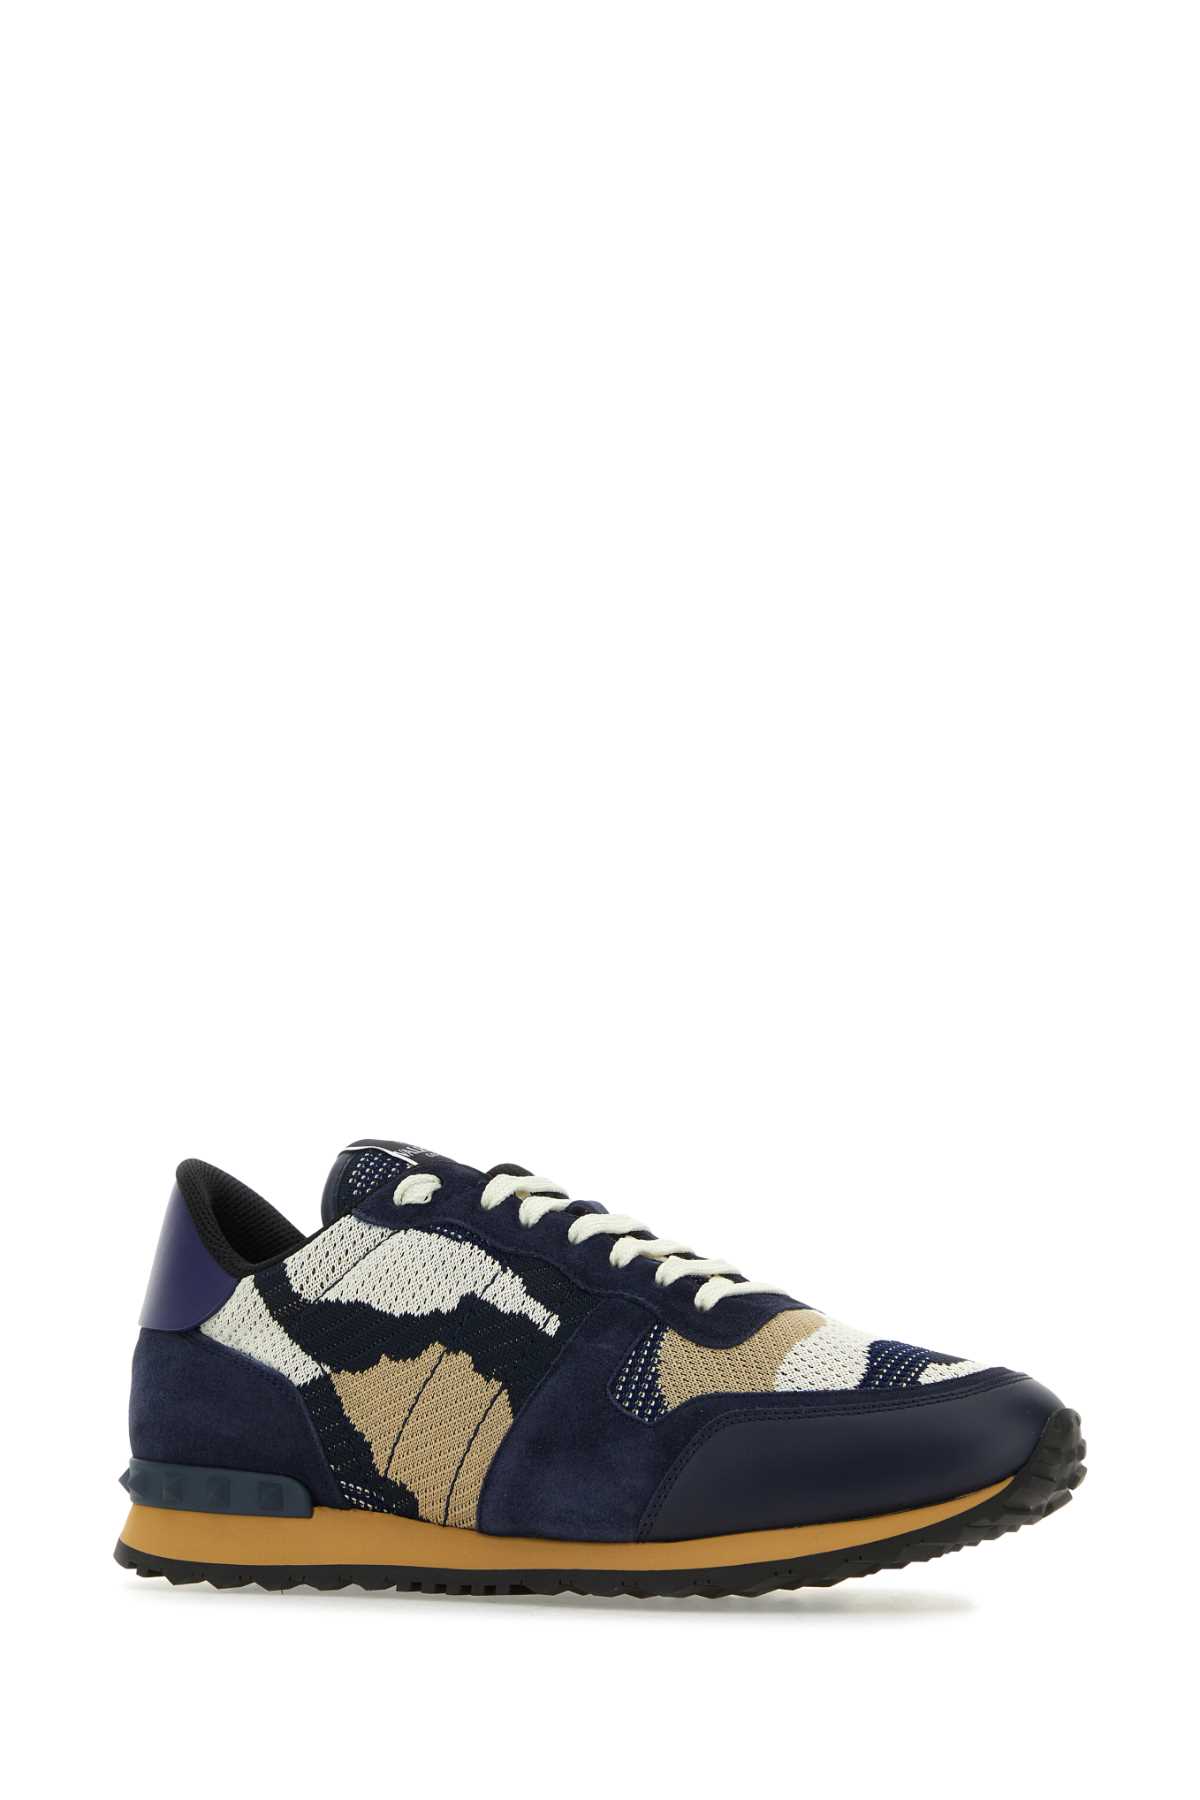 VALENTINO GARAVANI MULTICOLOR FABRIC AND LEATHER ROCKRUNNER CAMOUFLAGE SNEAKERS